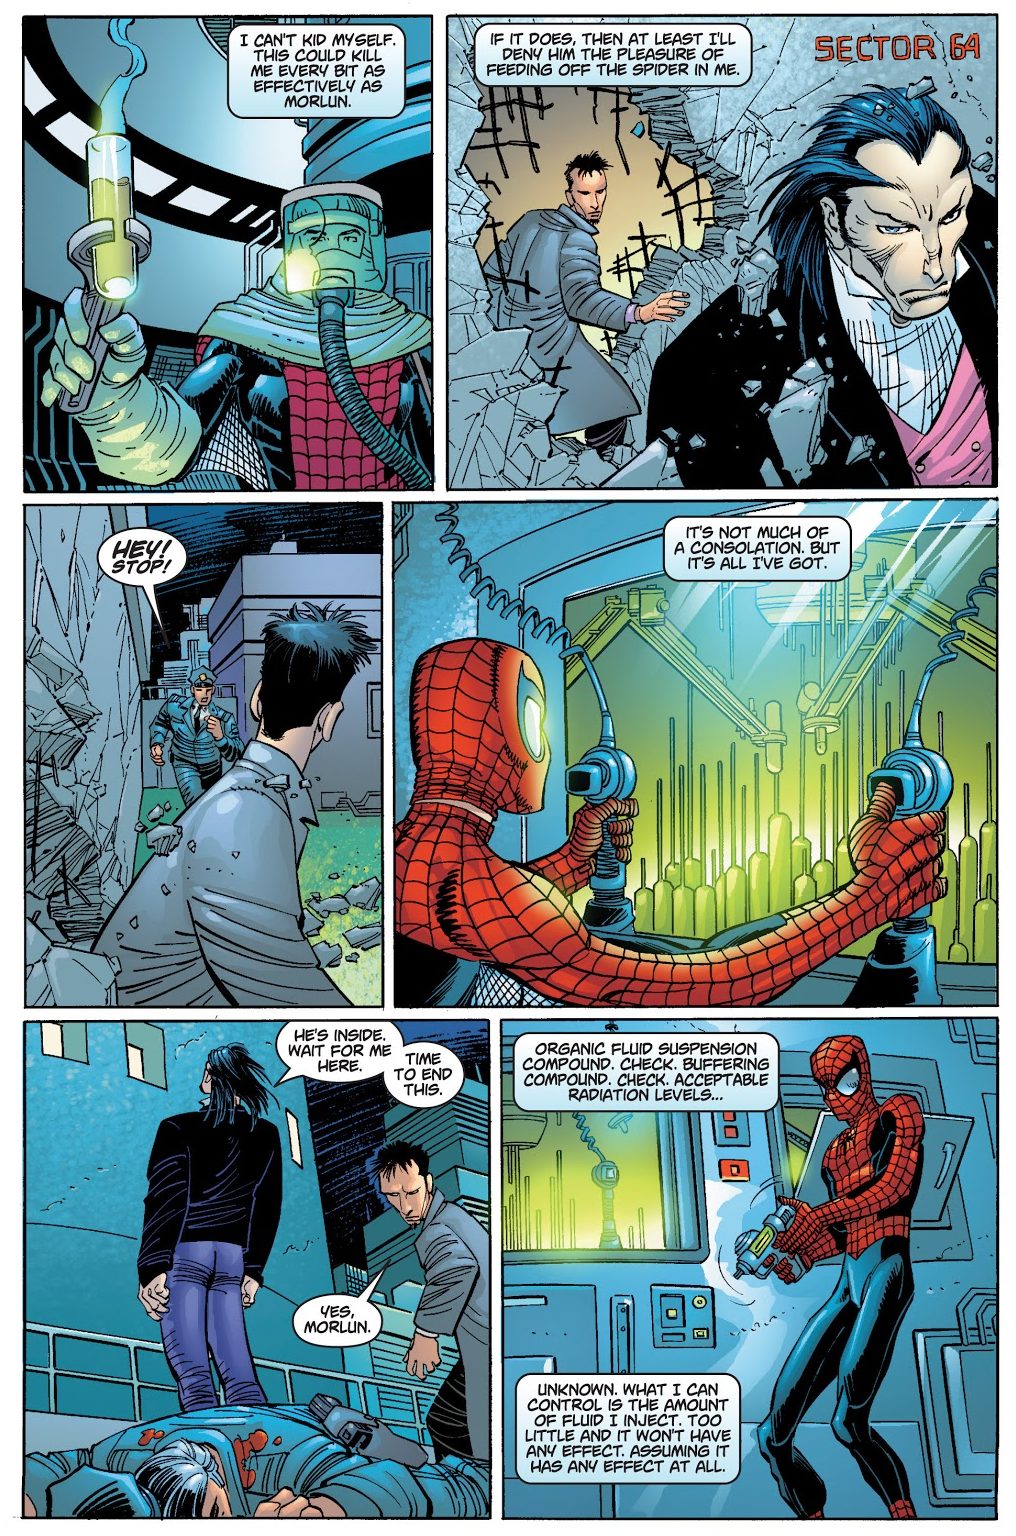 How Spider-Man Defeated Morlun